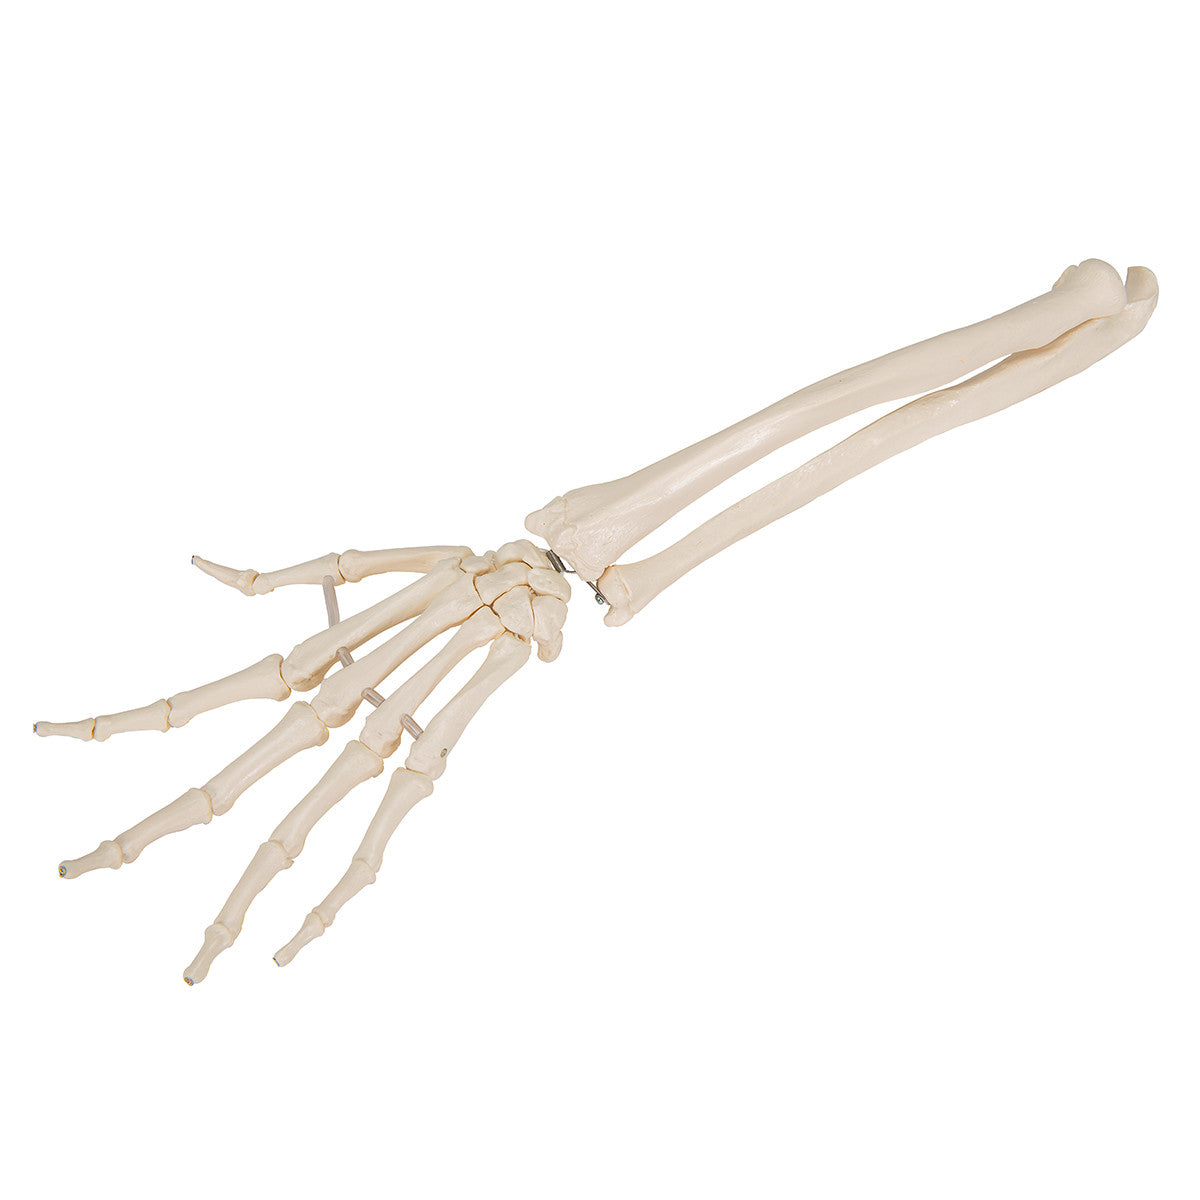 Hand Skeleton with lower arm